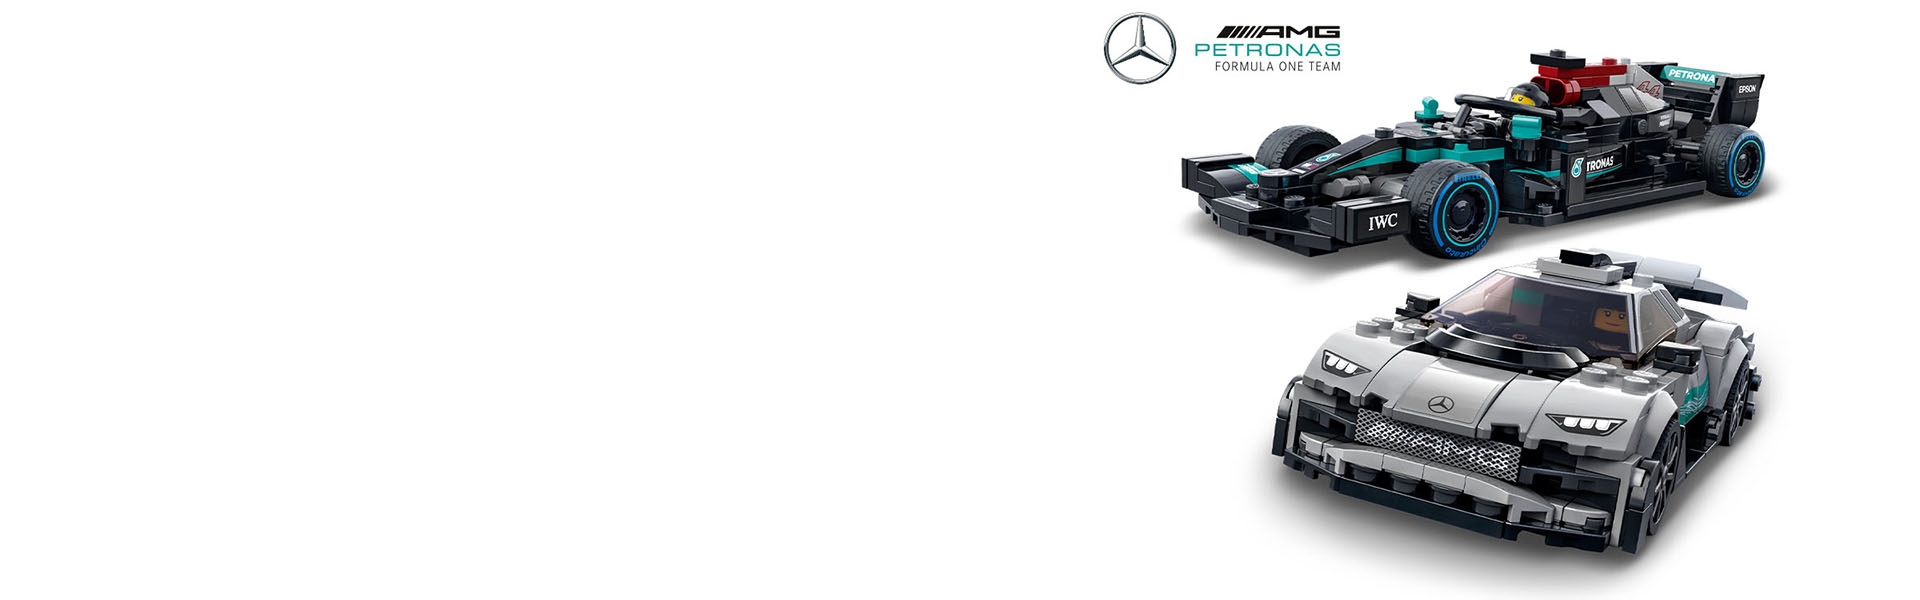 Mercedes-AMG F1 W12 E Performance & Mercedes-AMG Project One 76909 | Speed  Champions | Buy online at the Official LEGO® Shop GB